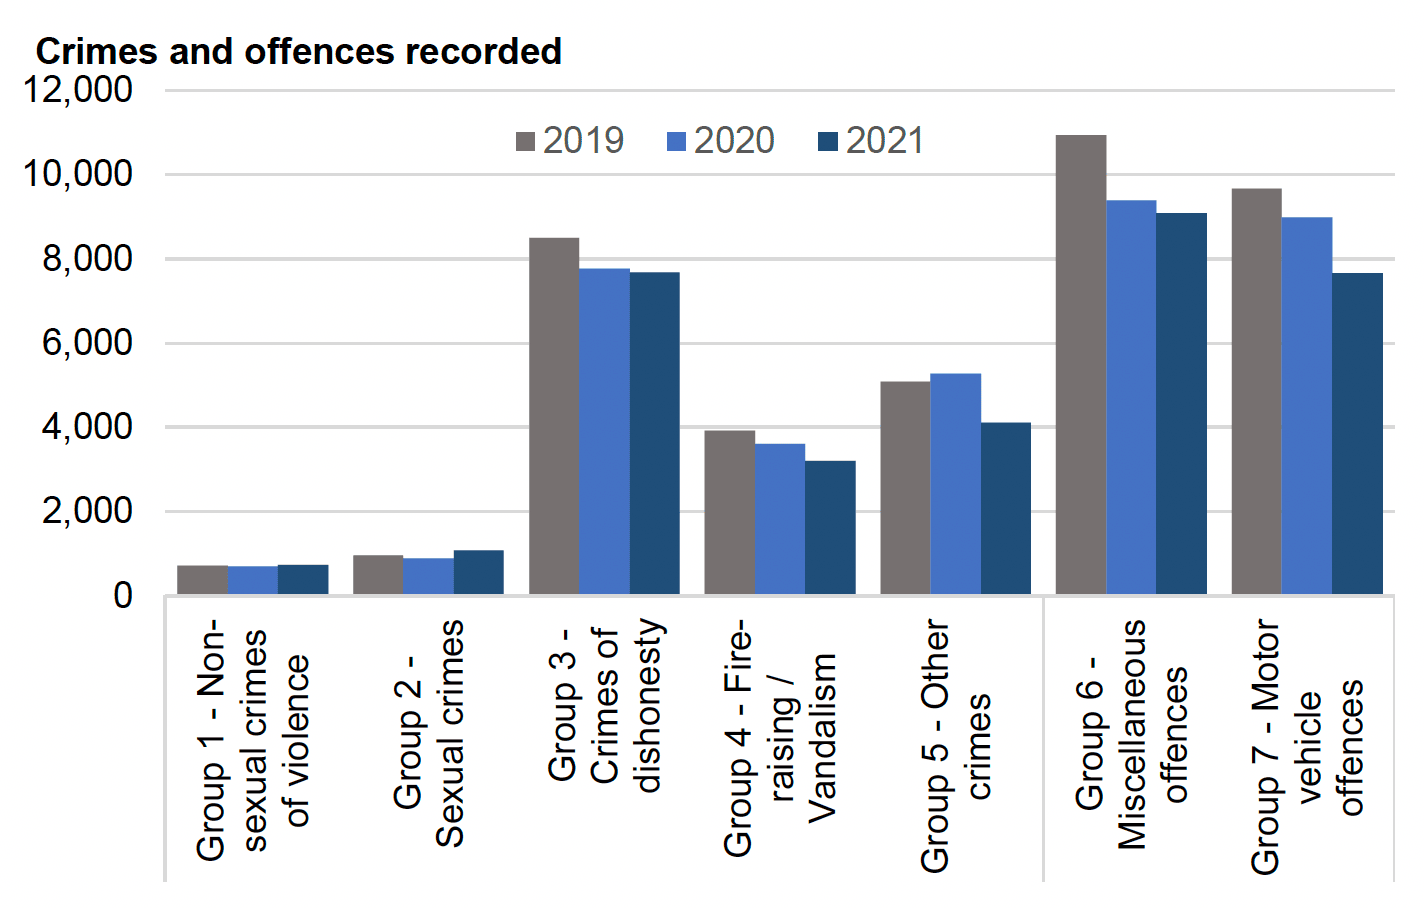 A bar chart showing the number of crimes and offences recorded by the police by crime group for December 2019, 2020 and 2021.